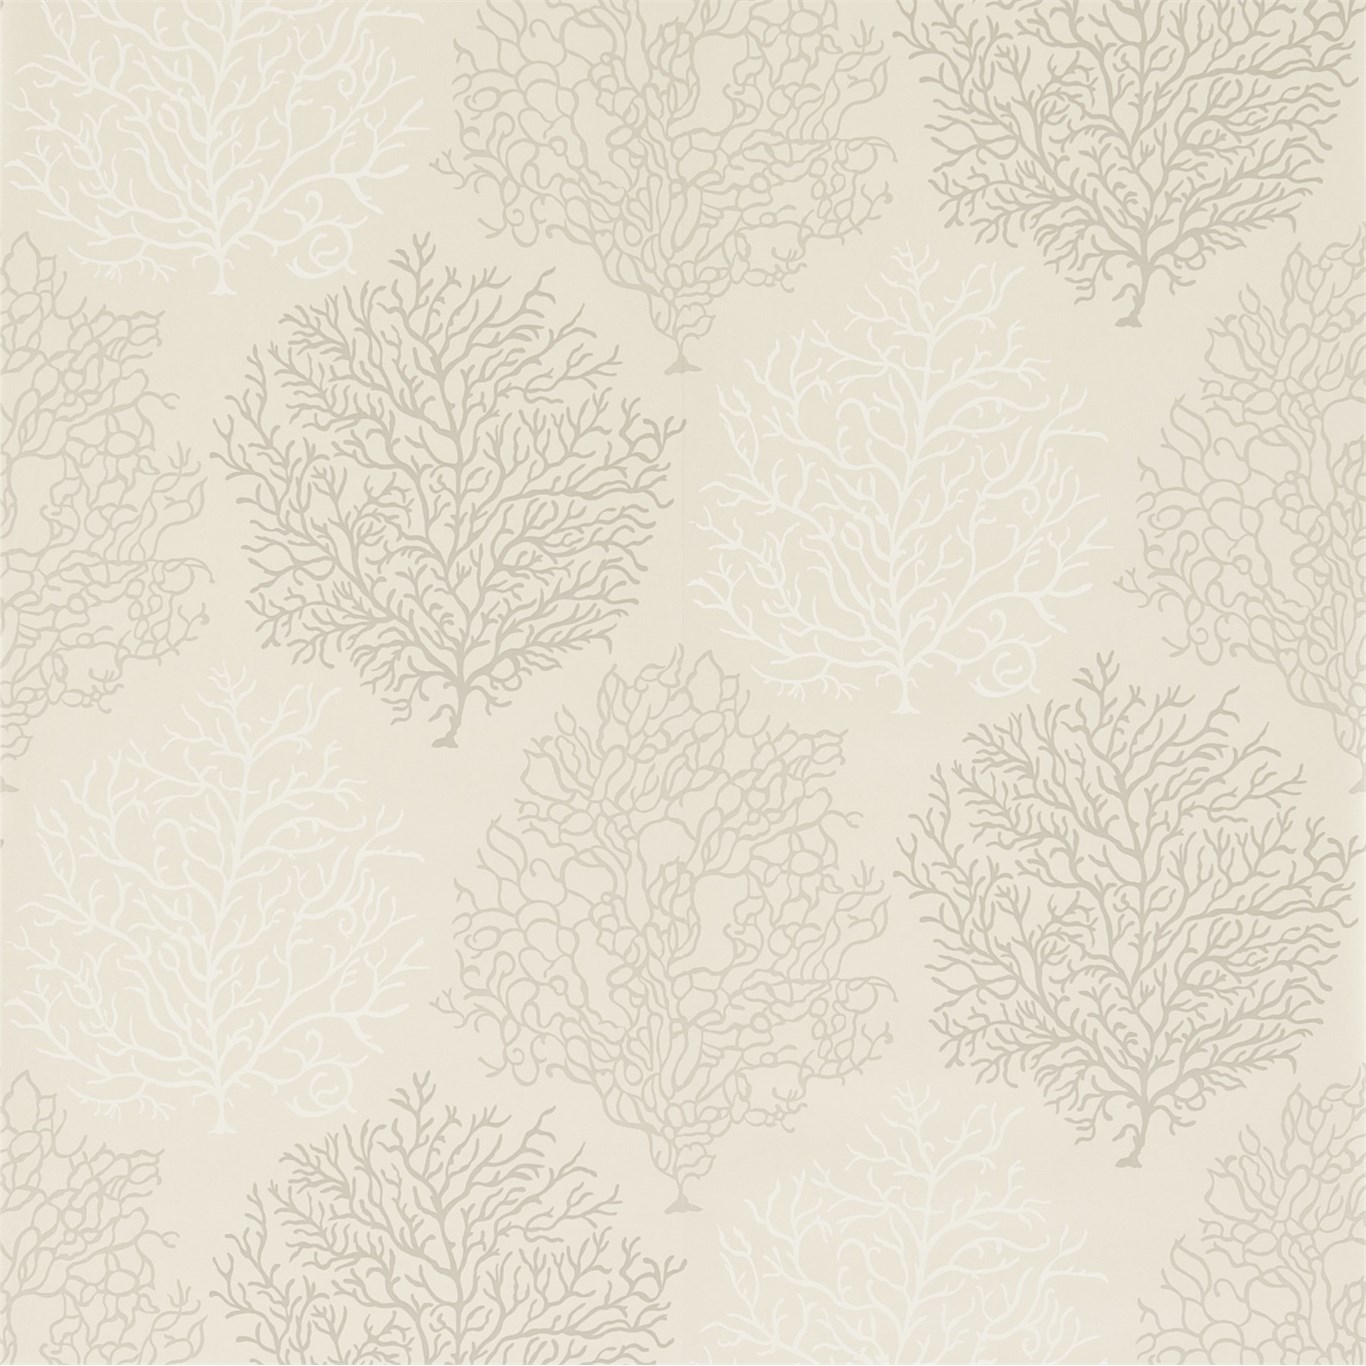 Tapet - Sanderson Voyage of Discovery Coral Reef Linen/Taupe